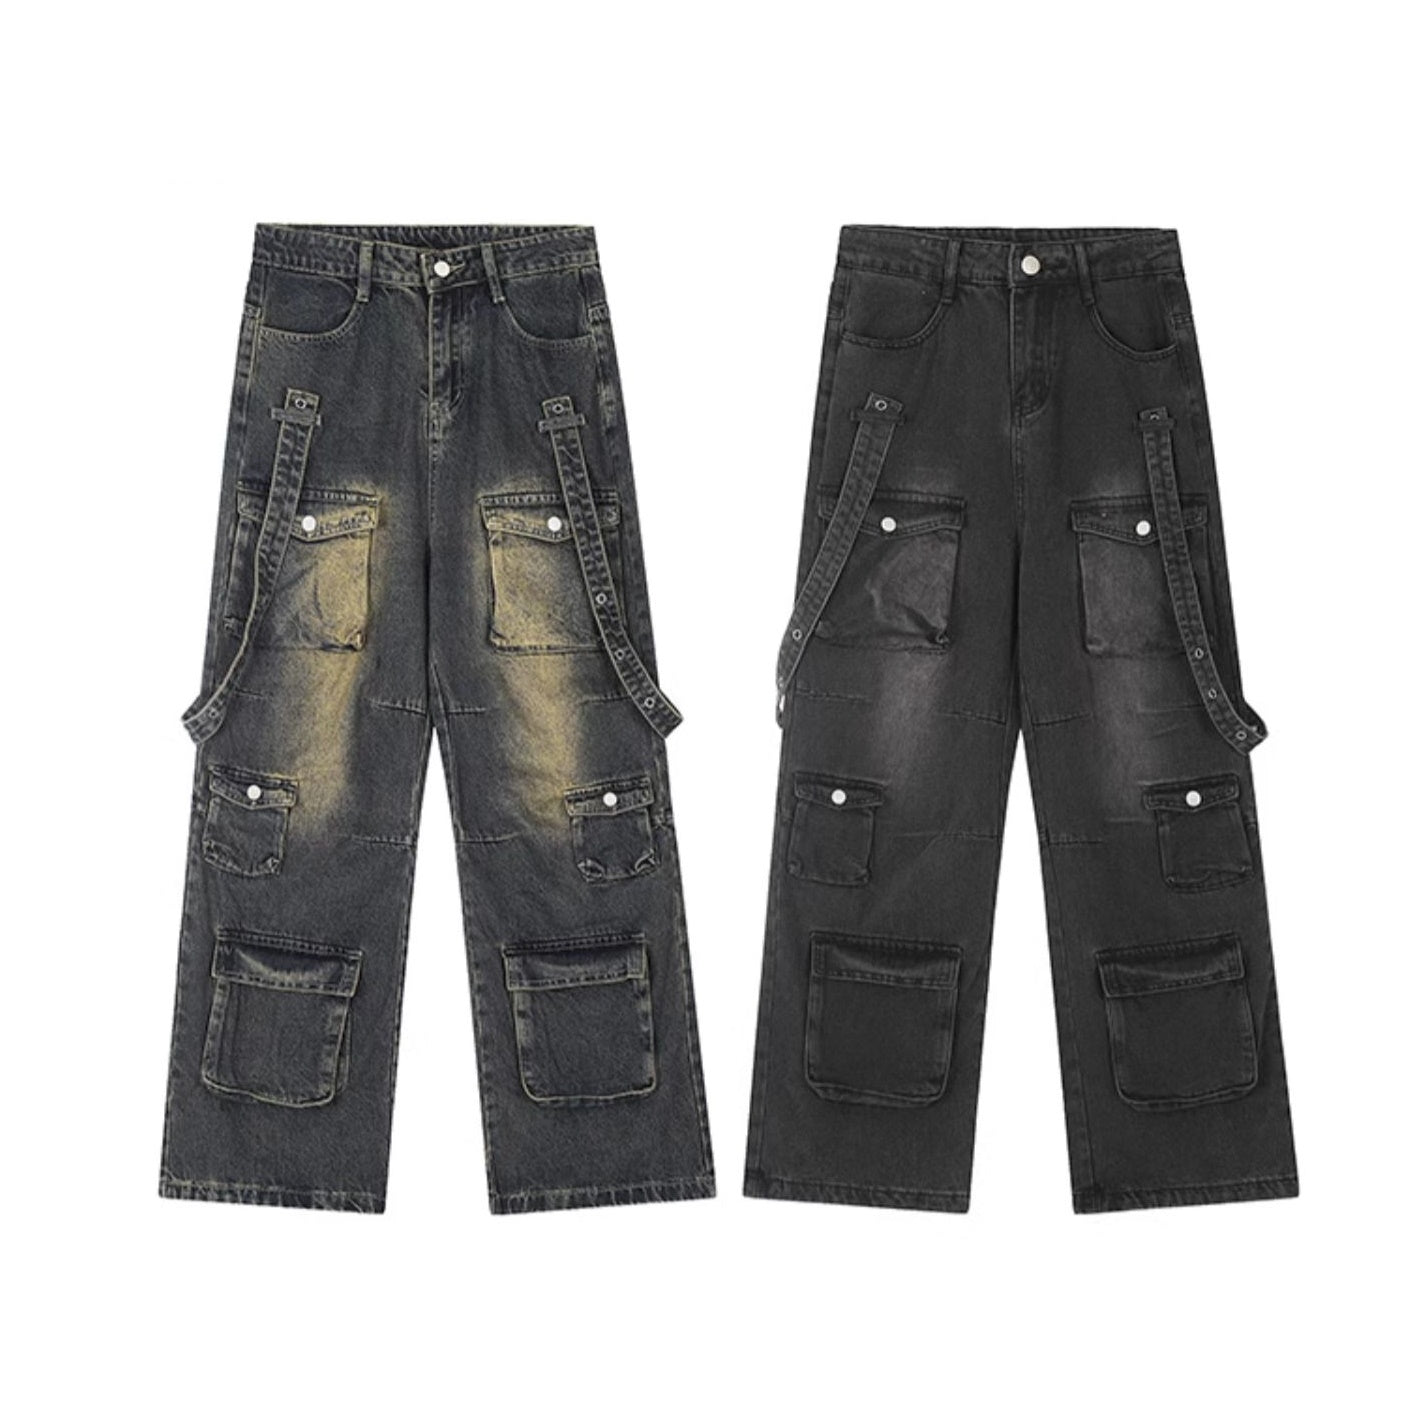 Strap Distressed Washed Multi-pocket Cargo Jeans MW9060